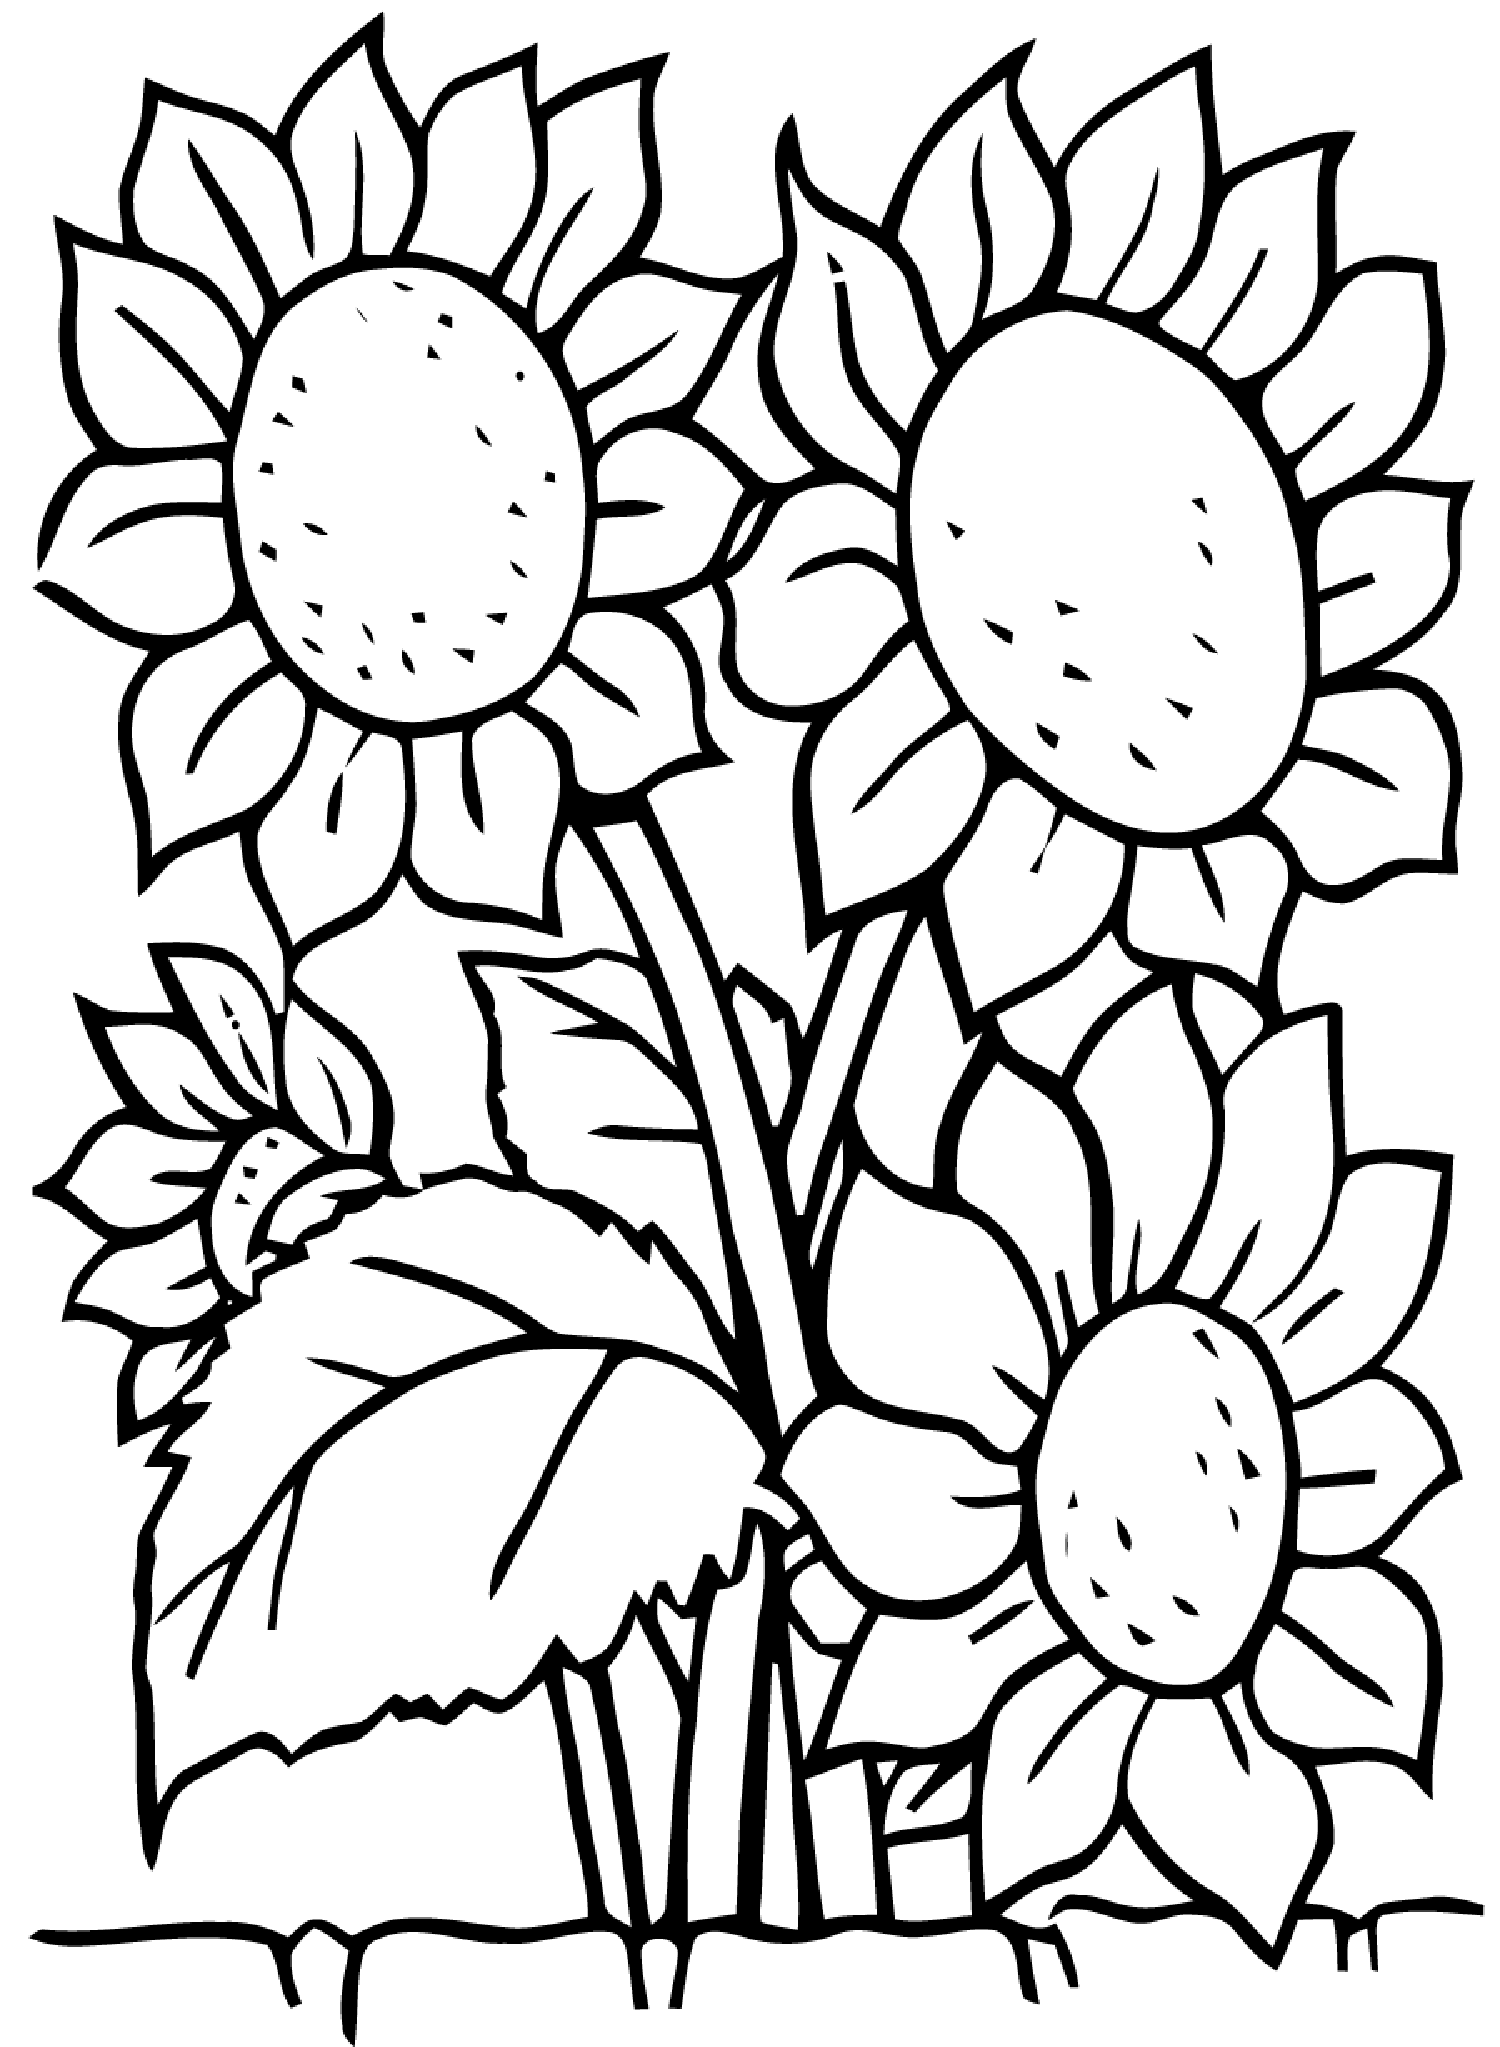 Download Sunflowers - Flowers Coloring pages for kids to print & color